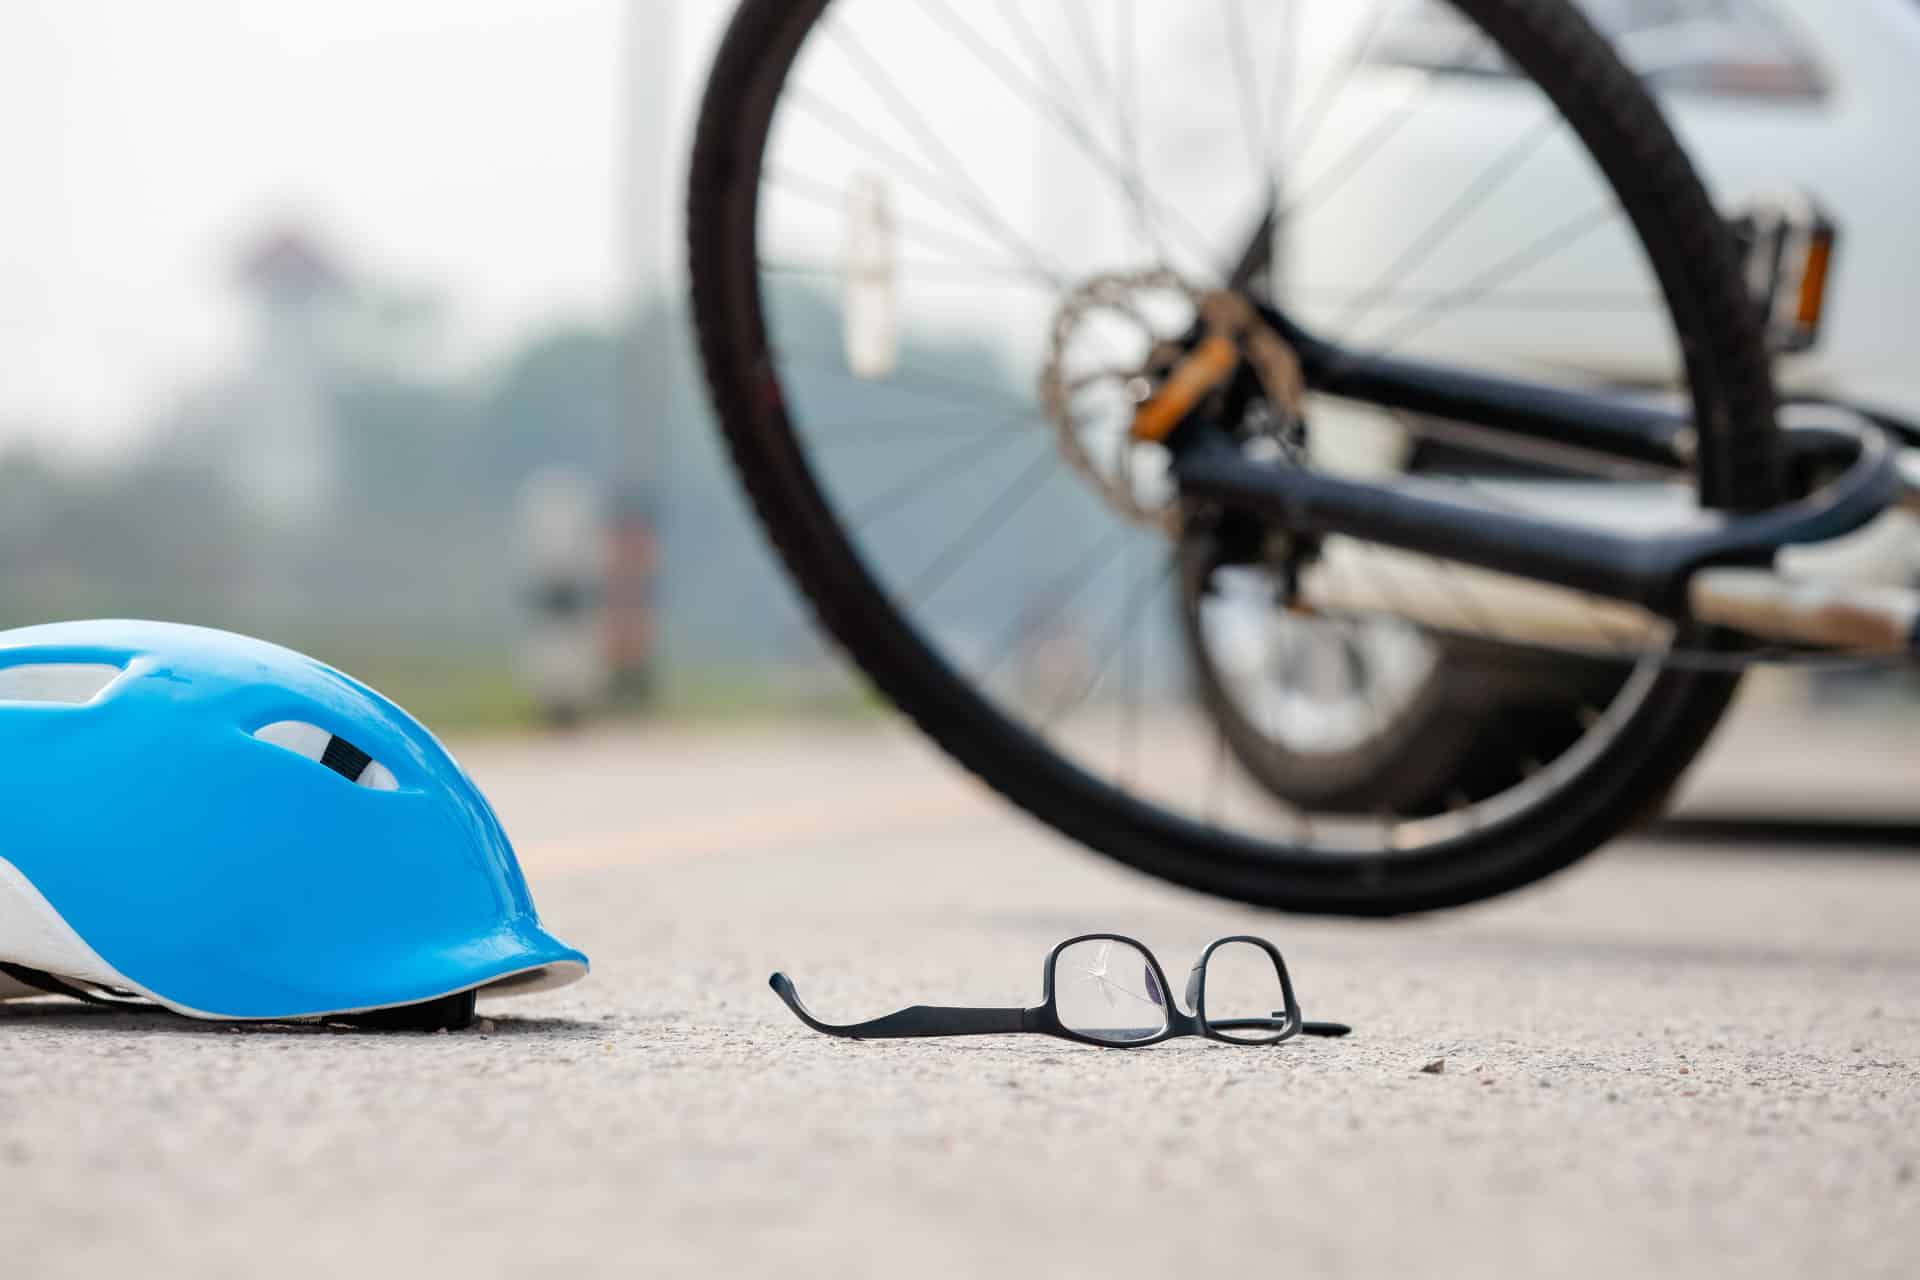 What To Do If You’re Involved in a Cycling Accident in NY